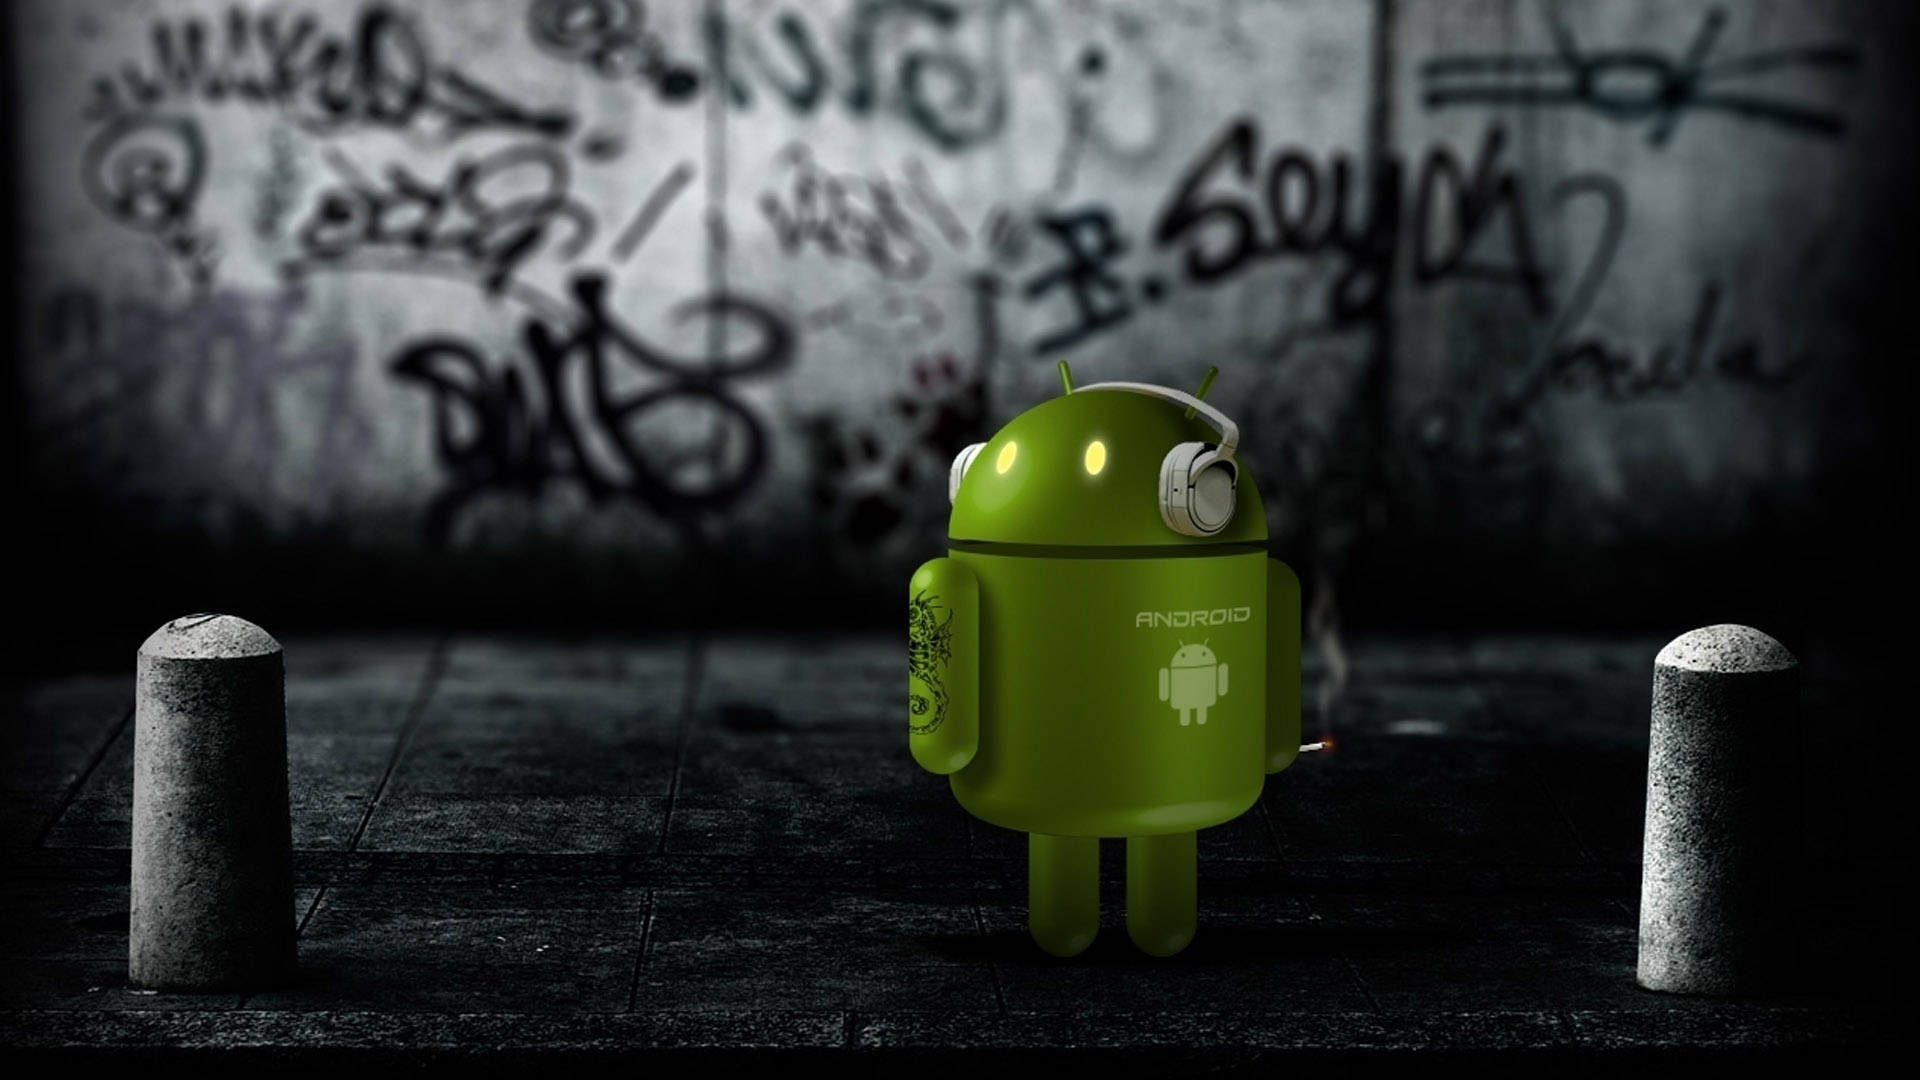 Android Robot Painted in Street Art Wallpaper